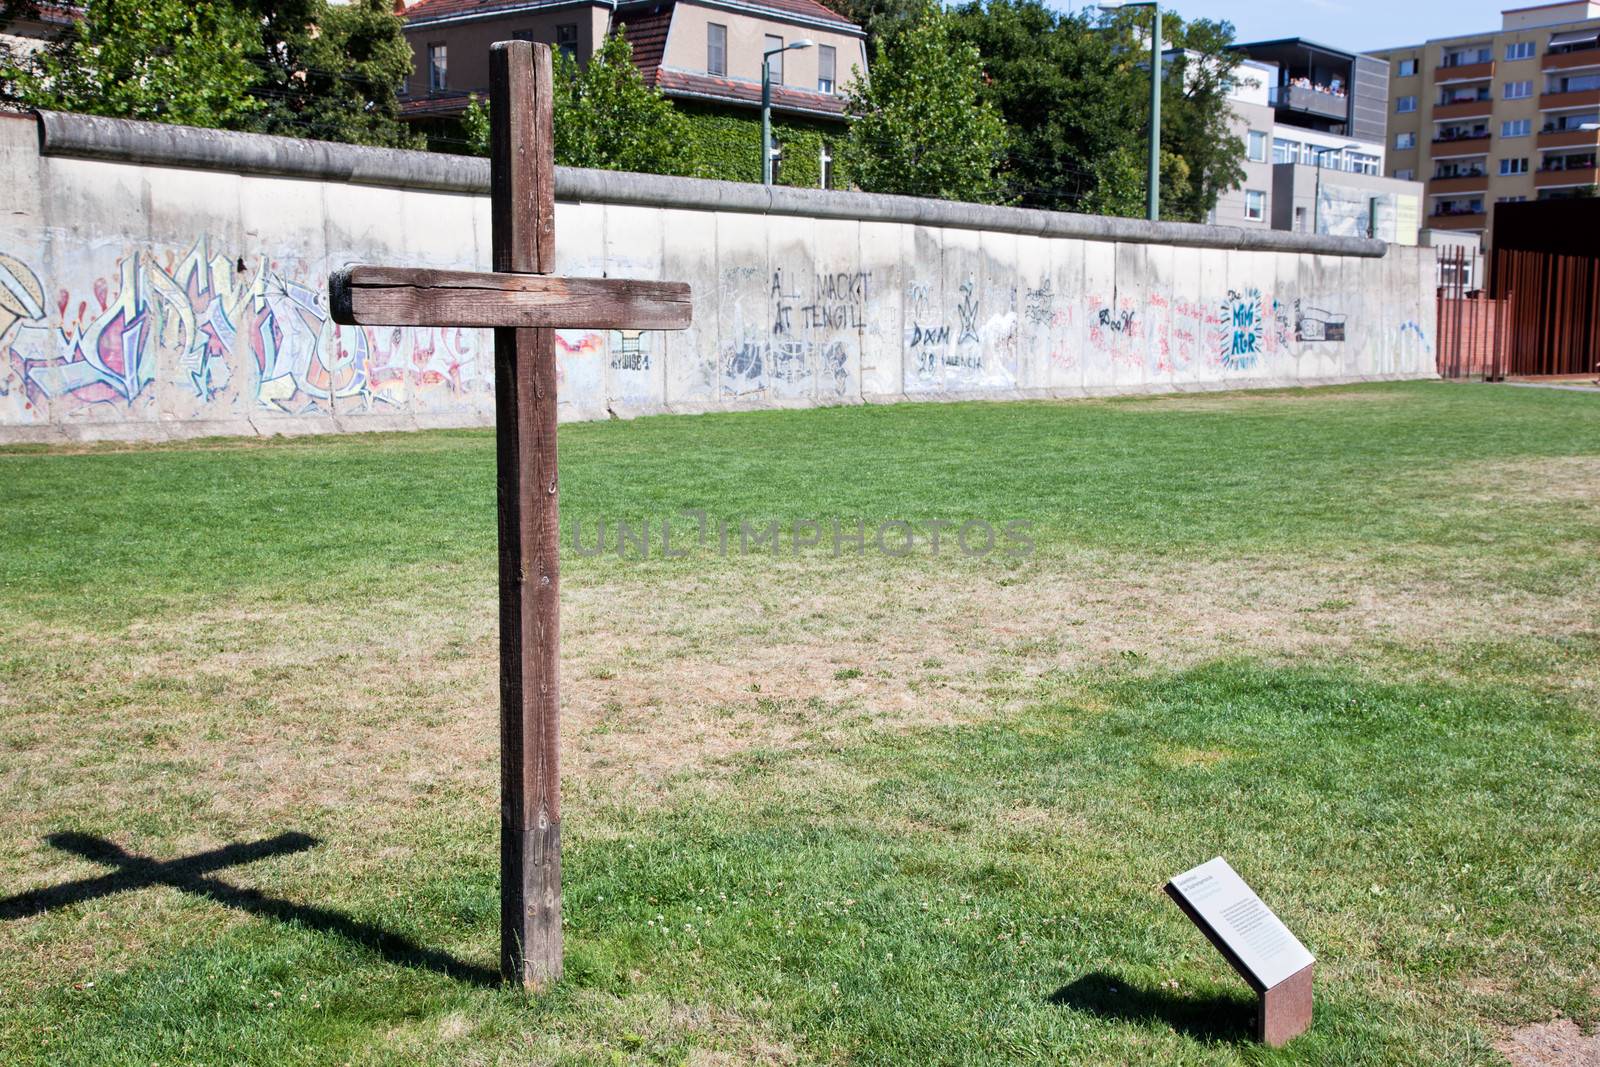 Berlin Wall Memorial with graffiti and cross commemorating the deaths and division. The Gedenkstatte Berliner Mauer 